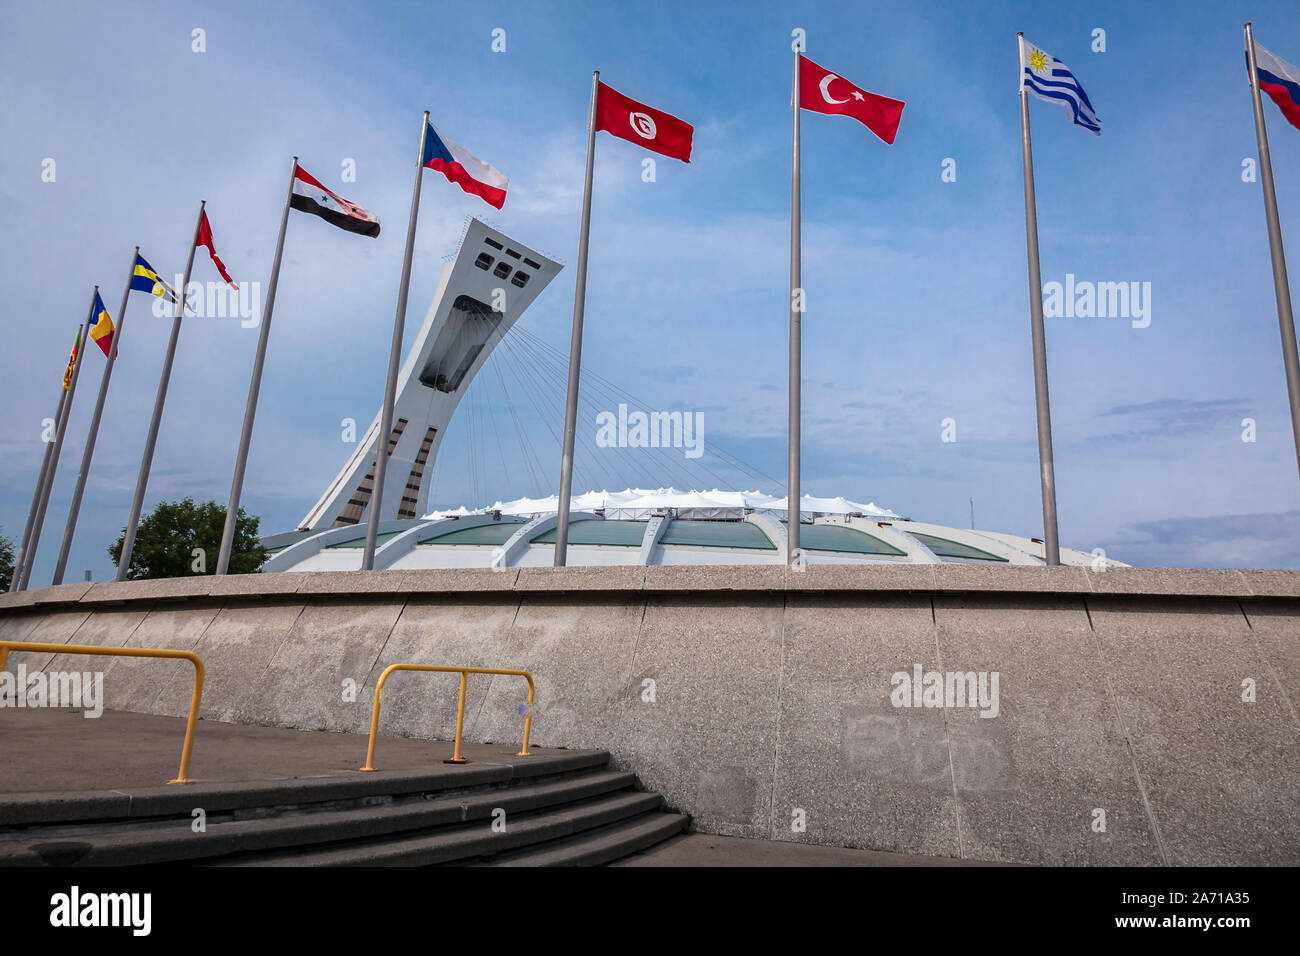 Olympic stadium of Montreal with participating nations flags, July 06, 2012  Quebec, Canada - Stadium was opened in 1976 for the Summer olympics Stock Photo